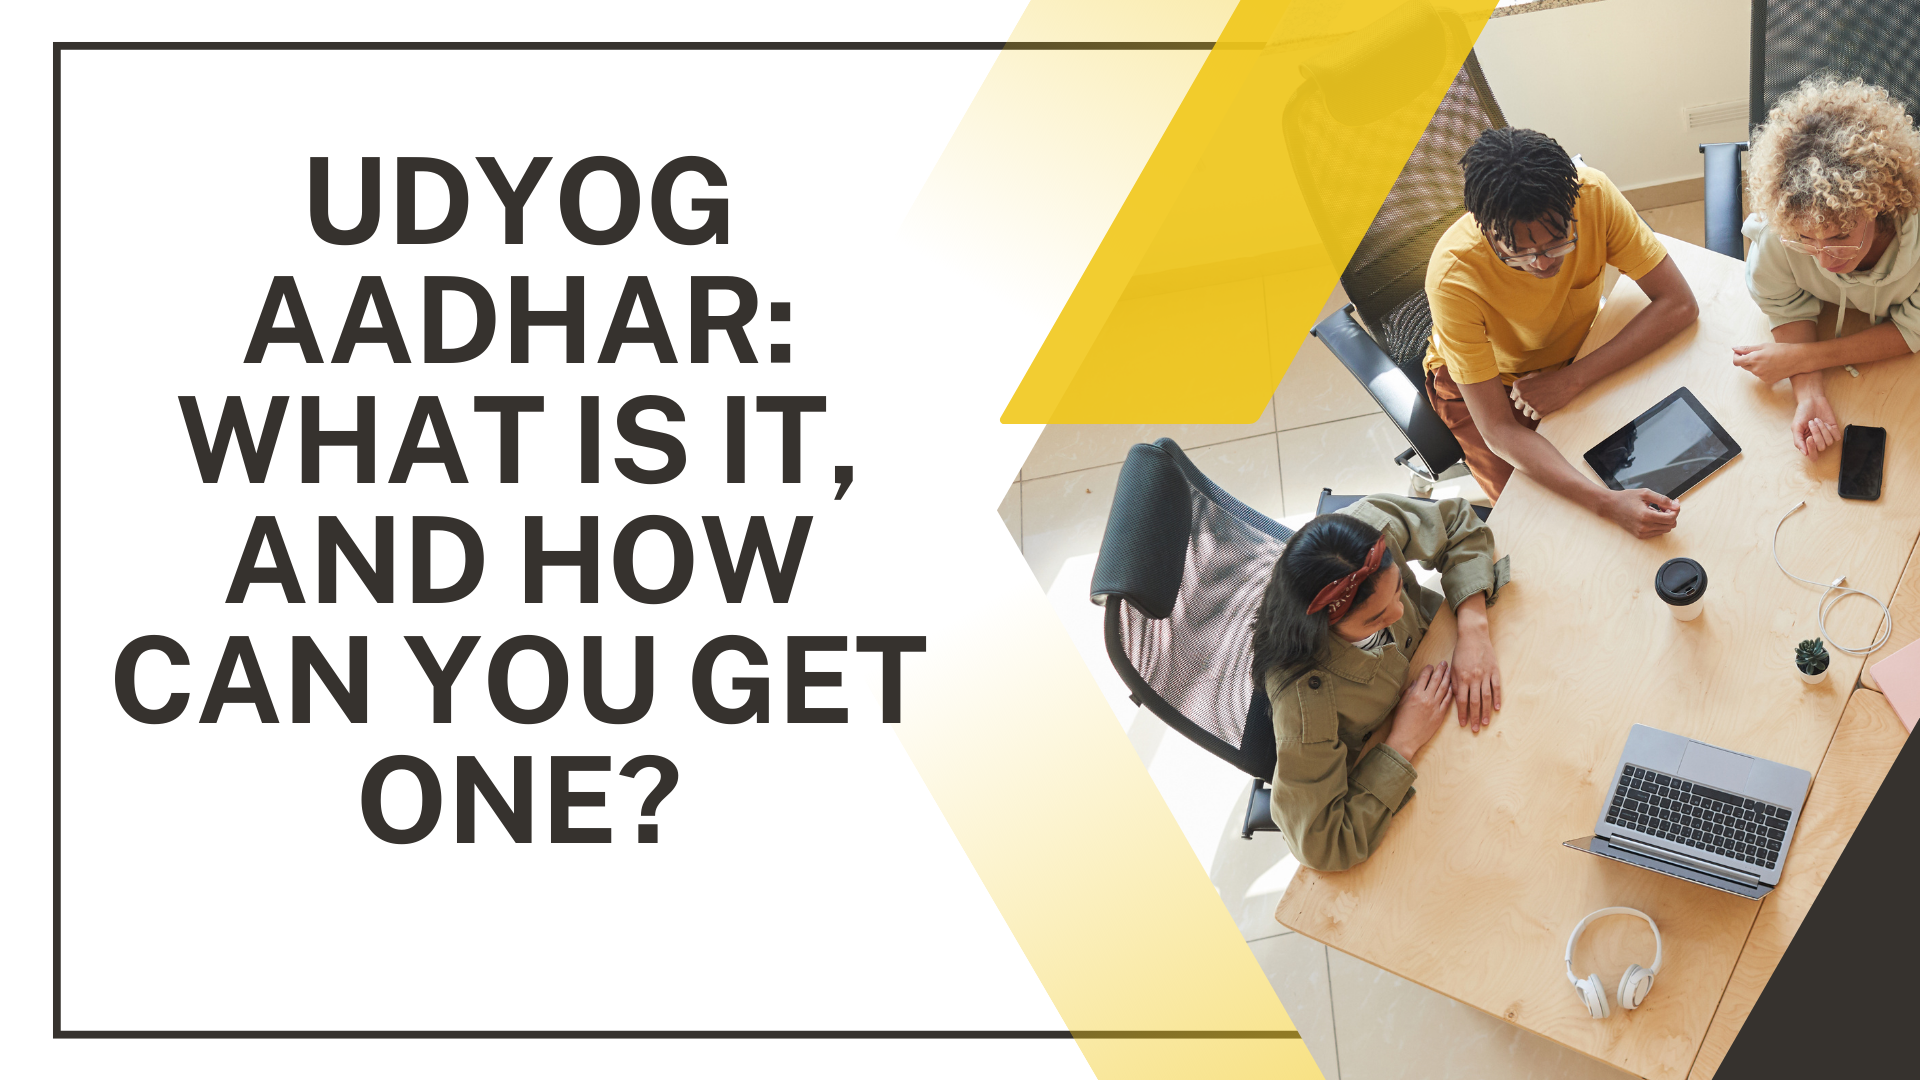 Udyog Aadhar What is it, and how can you get one